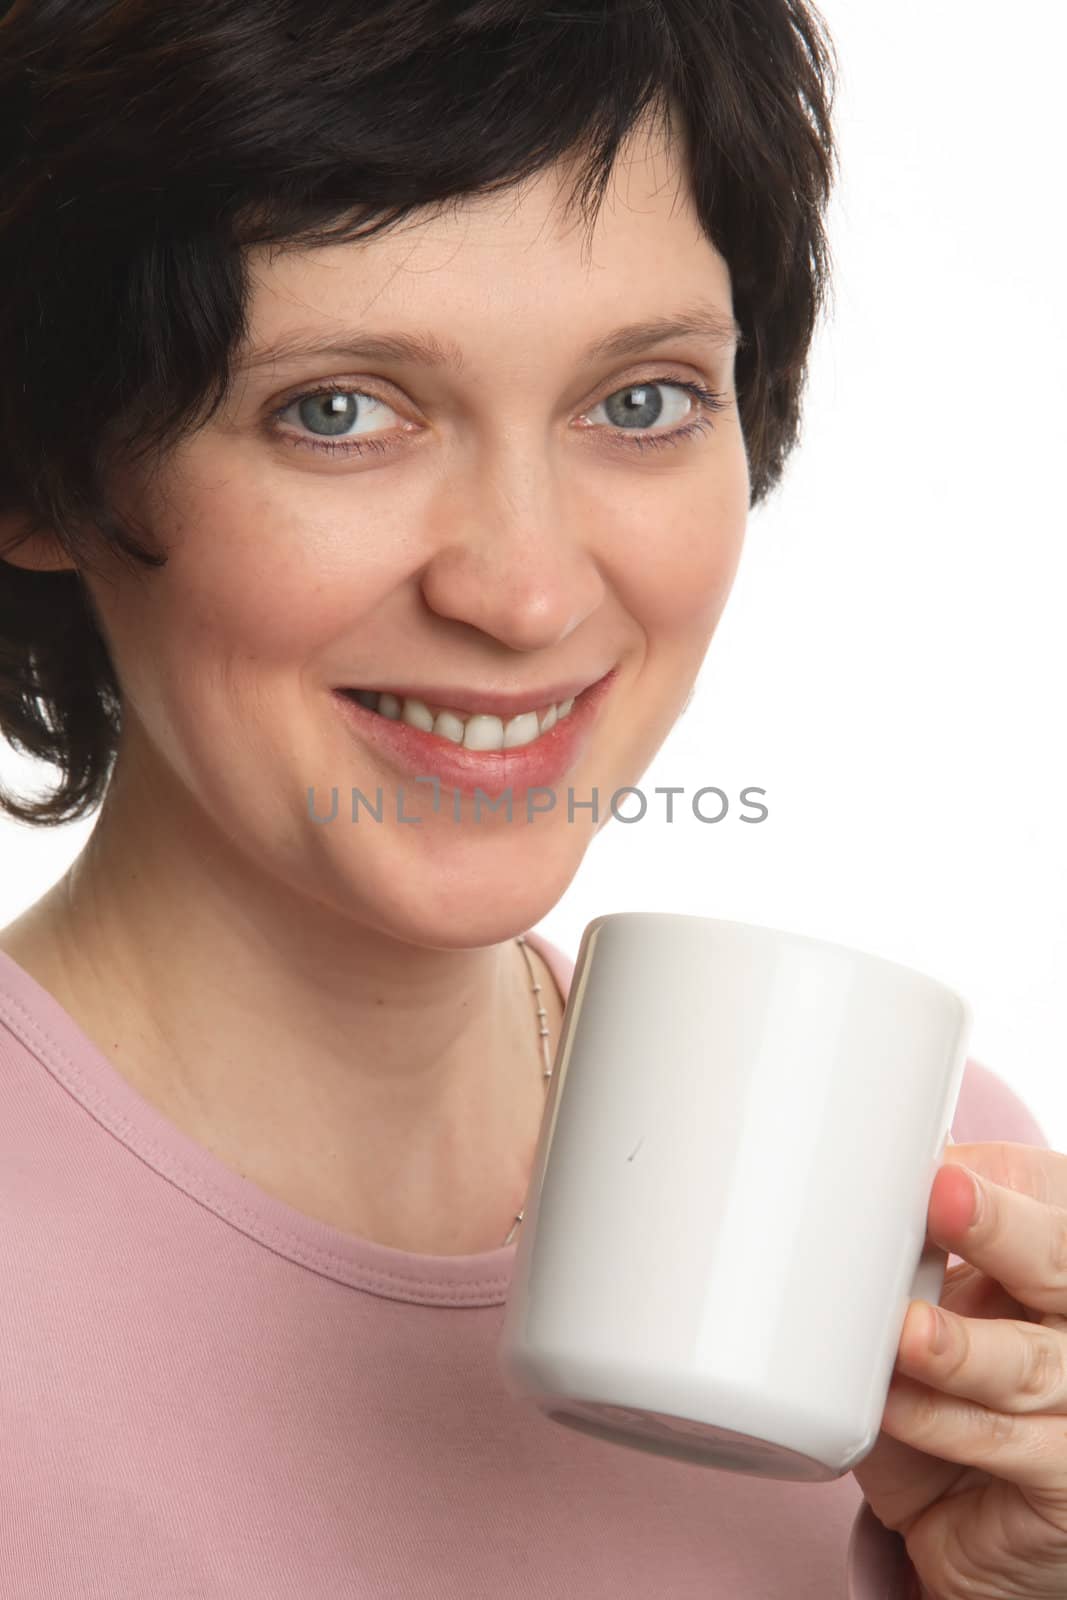 The girl holds a cup in hands and smiles